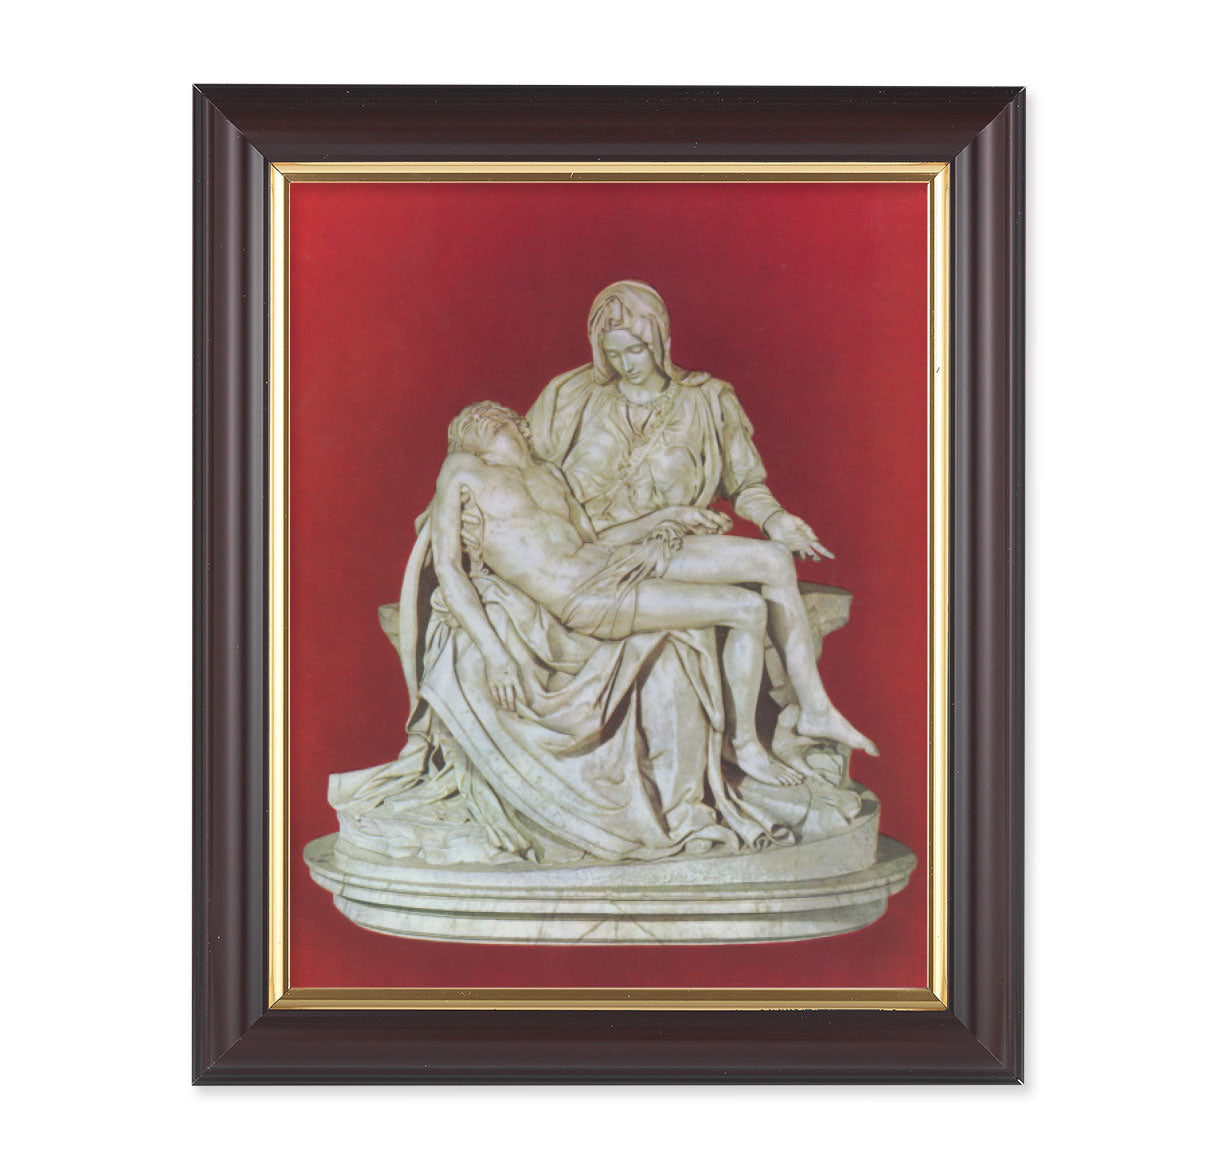 The Pieta Picture Framed Wall Art Decor, Medium, Classic Fluted Dark Walnut Finished Frame with Gold-Leaf Lip